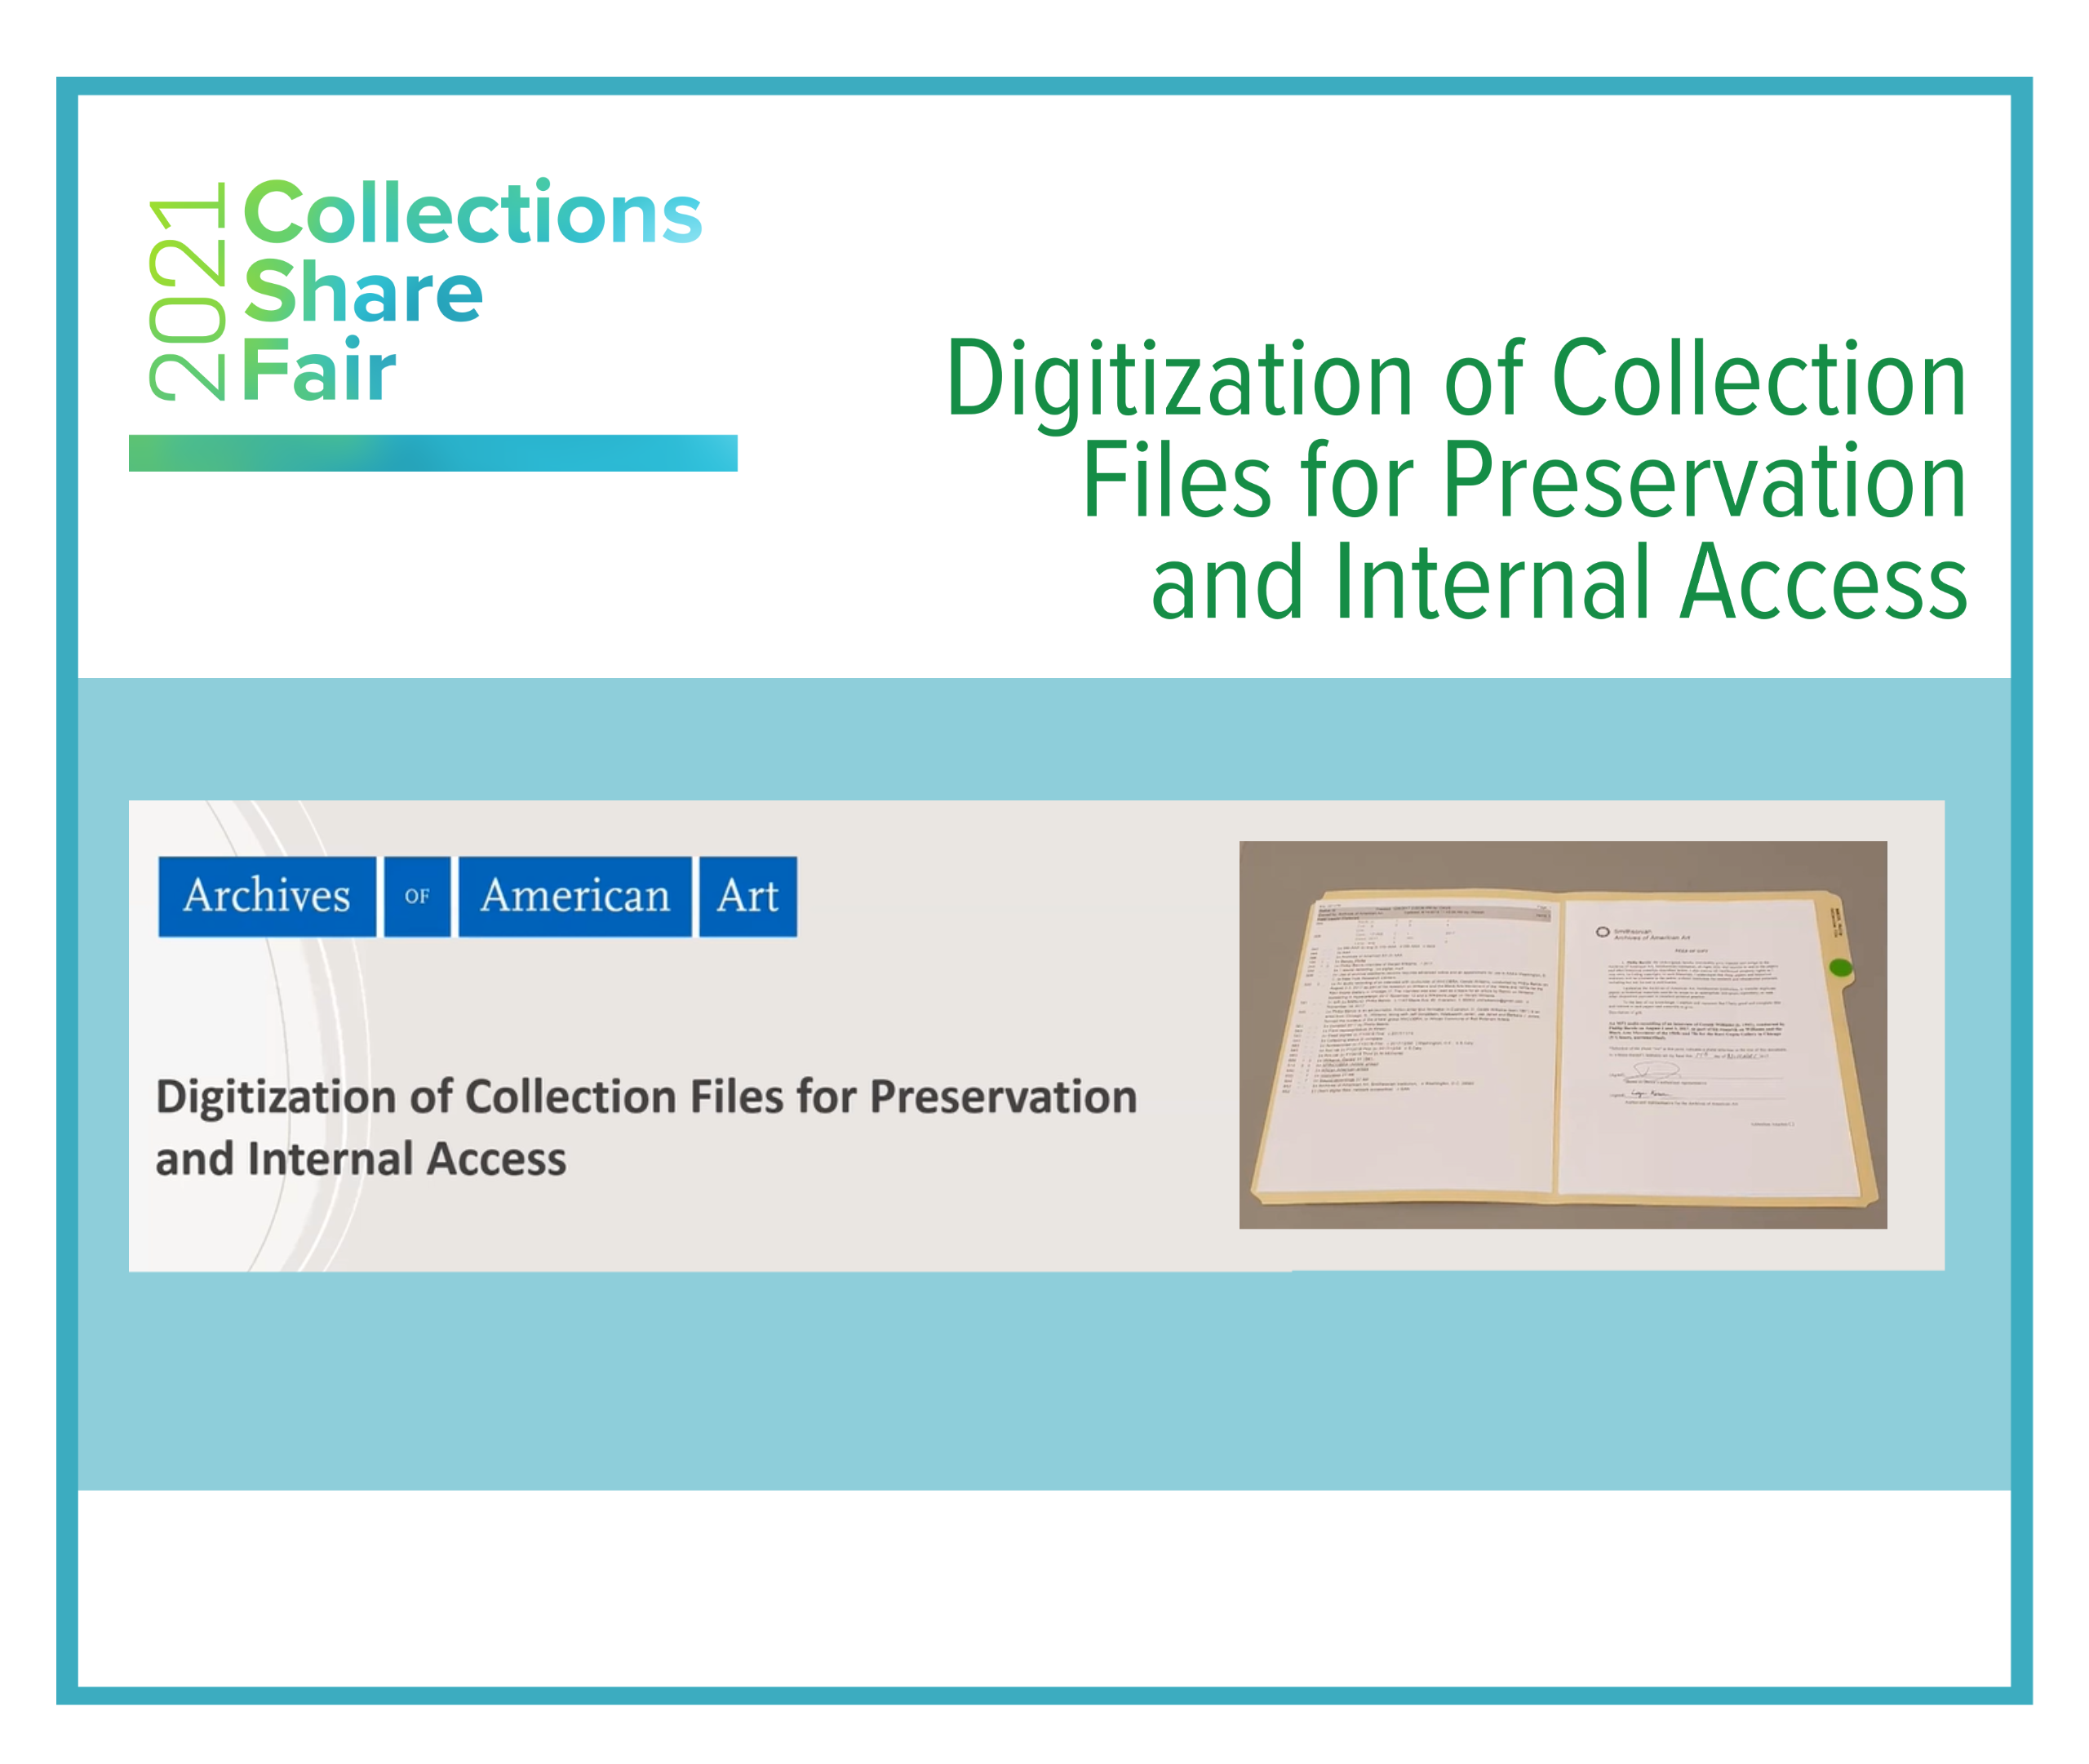 Digitization of Collections Files for Preservation and Internal Access